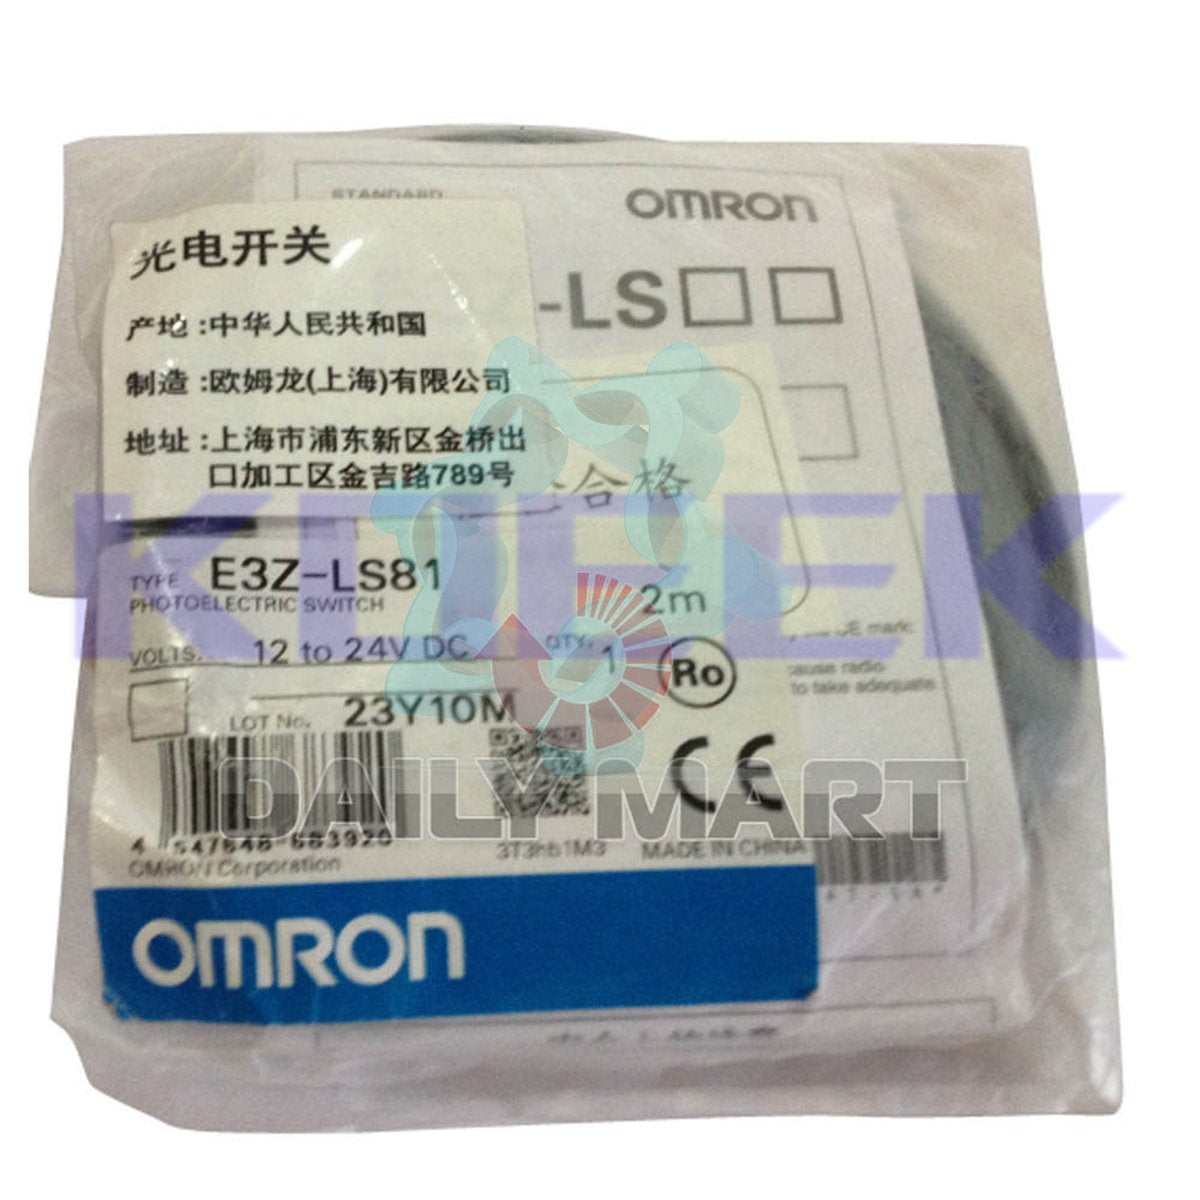 E3Z-LS81 KOEED 1, 80%, import_2020_10_10_031751, Omron, Other